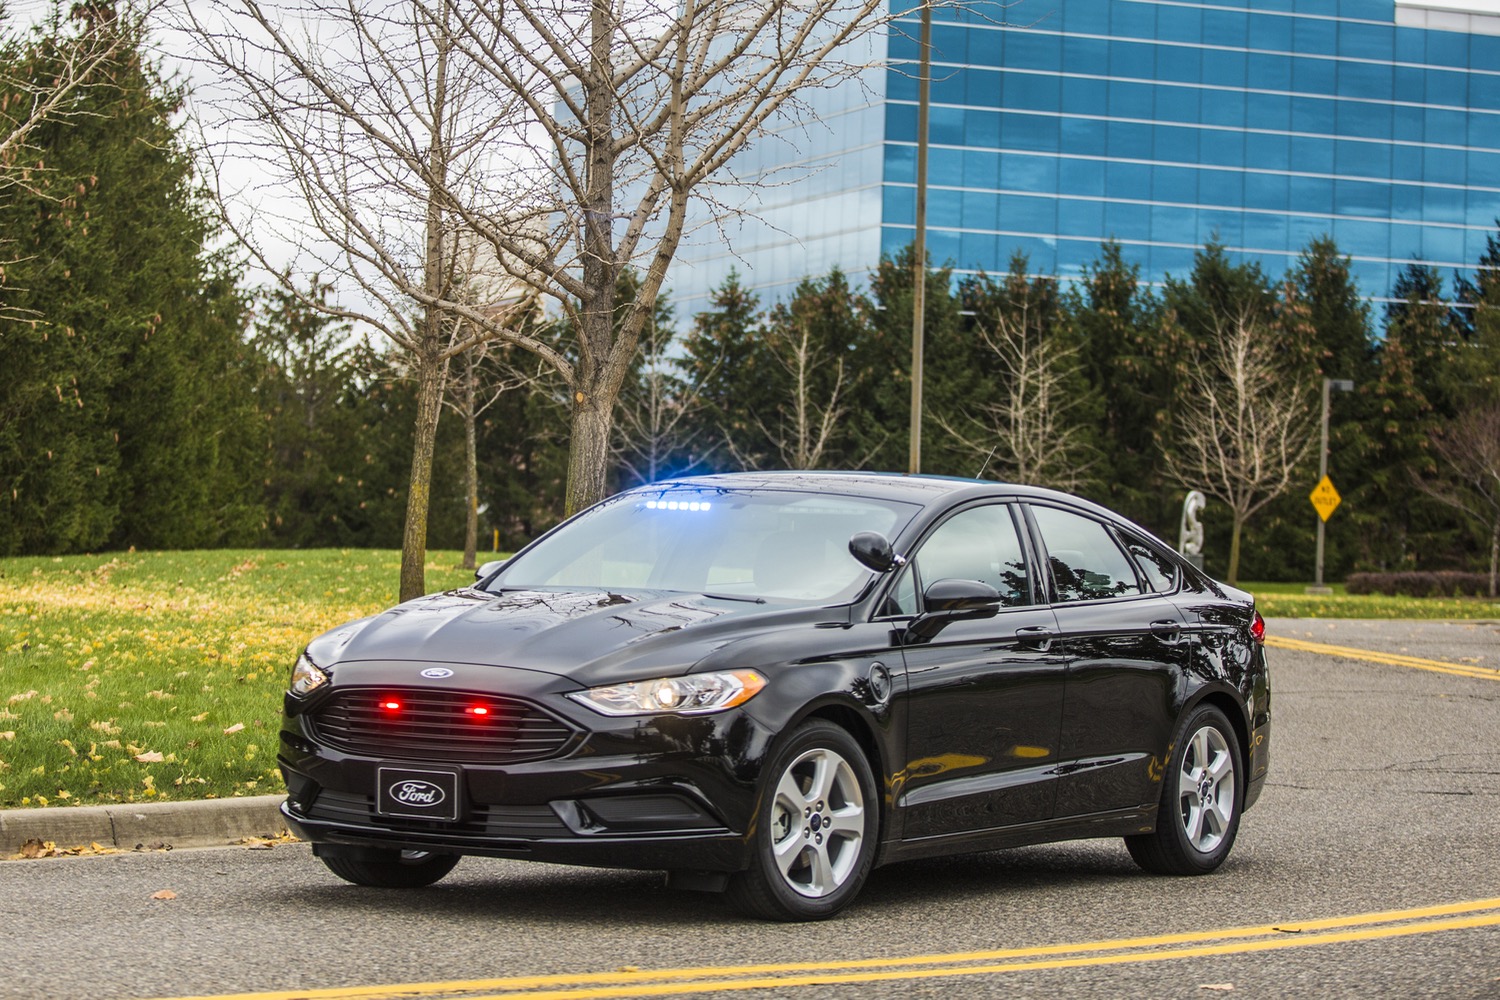 Ford Fusion Energi Police Car  Photos, Details, And Specs